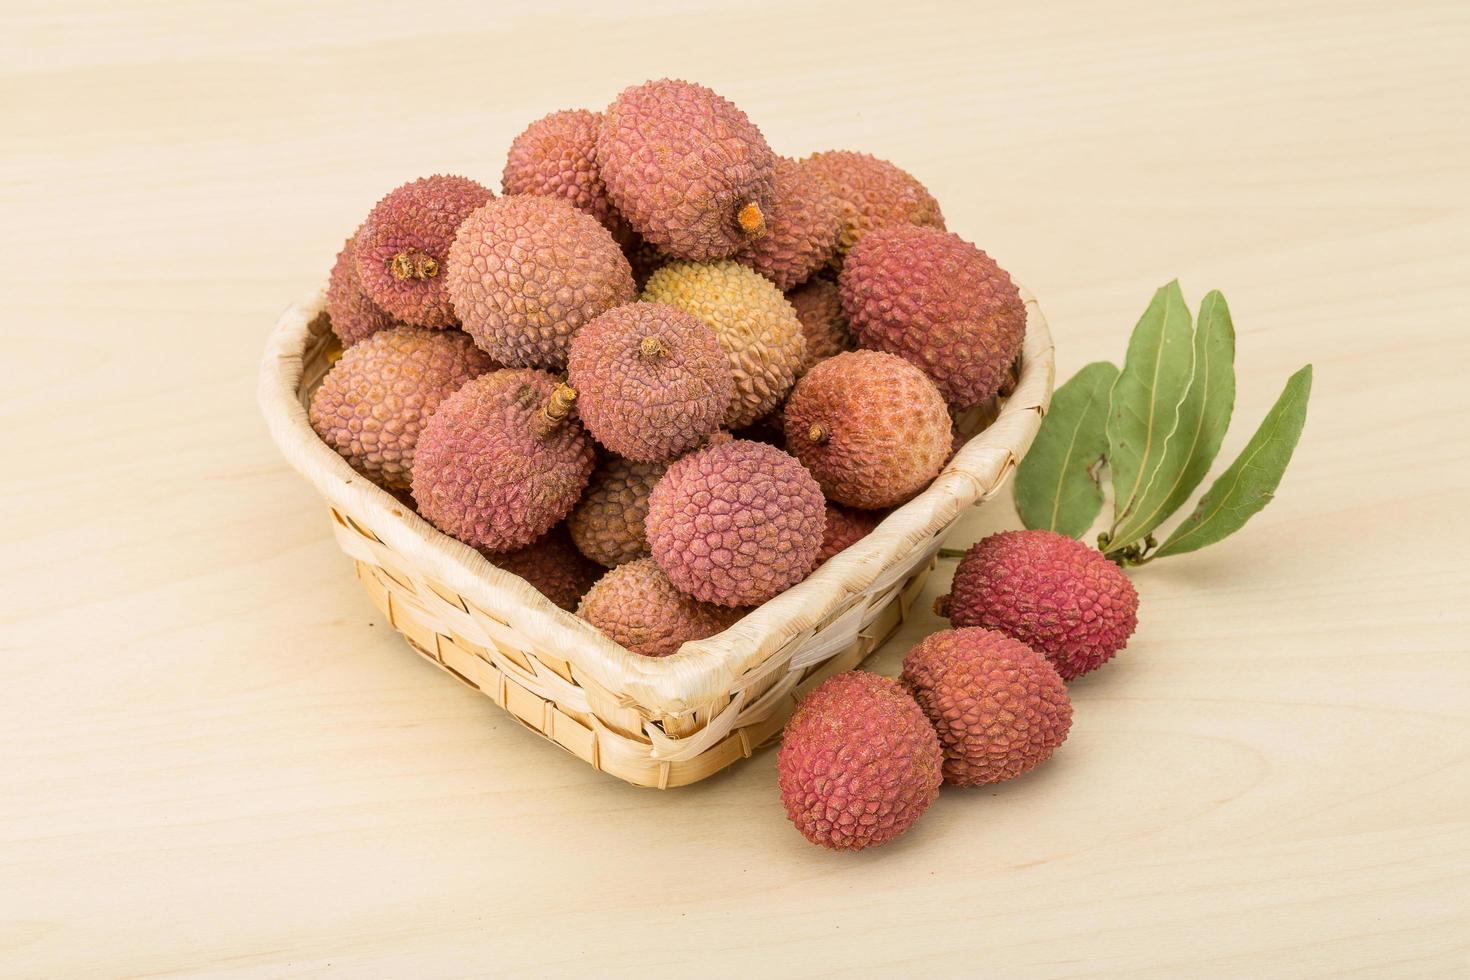 Tropical fruit - lychee photo